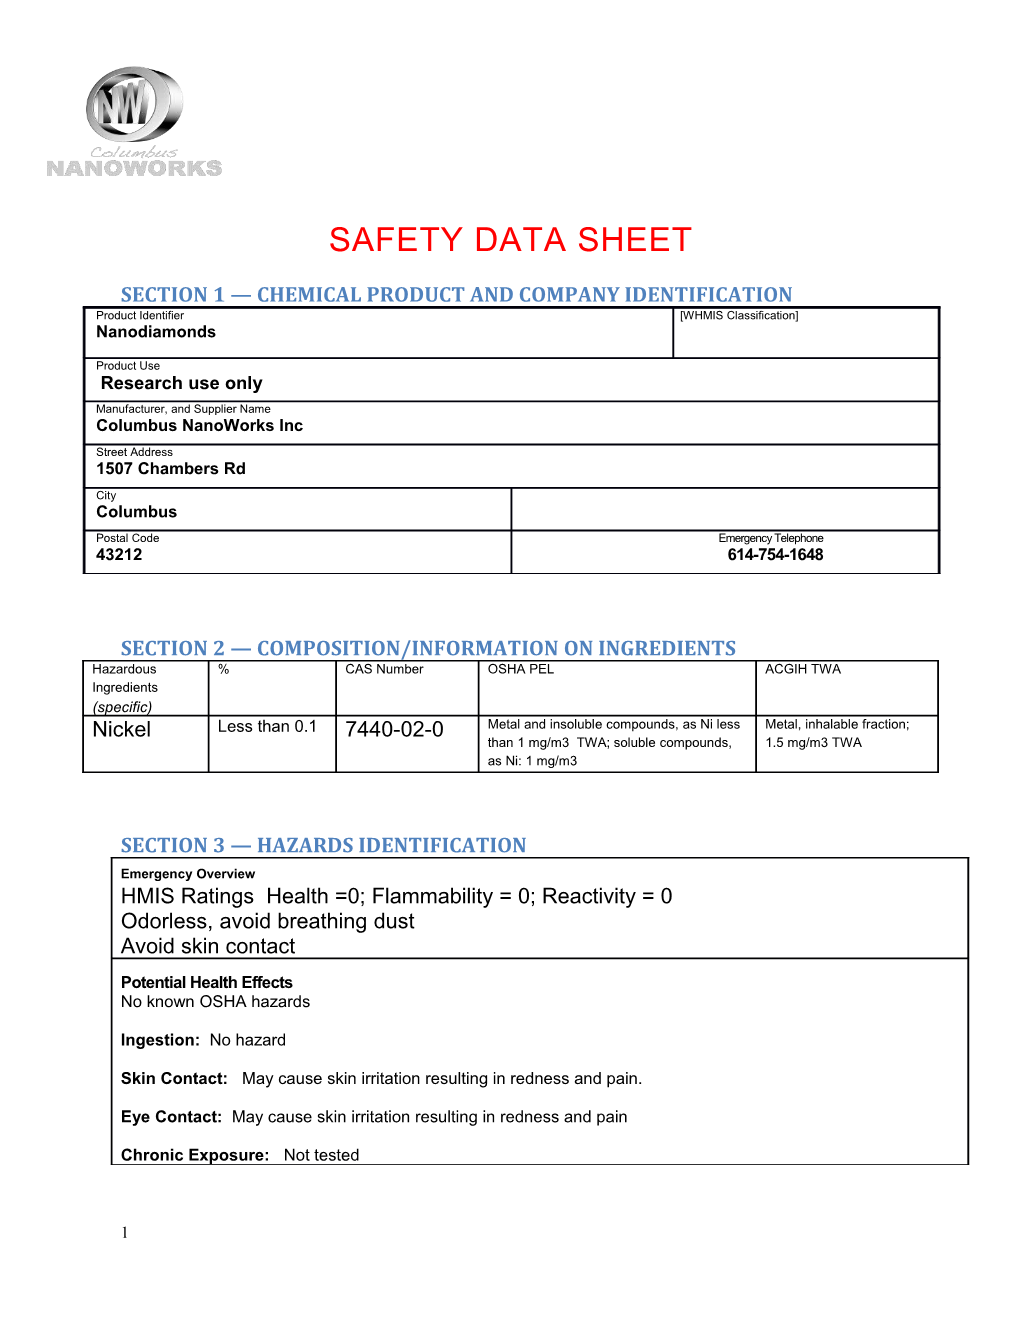 Section 1 Chemical Product and Company Identification s2